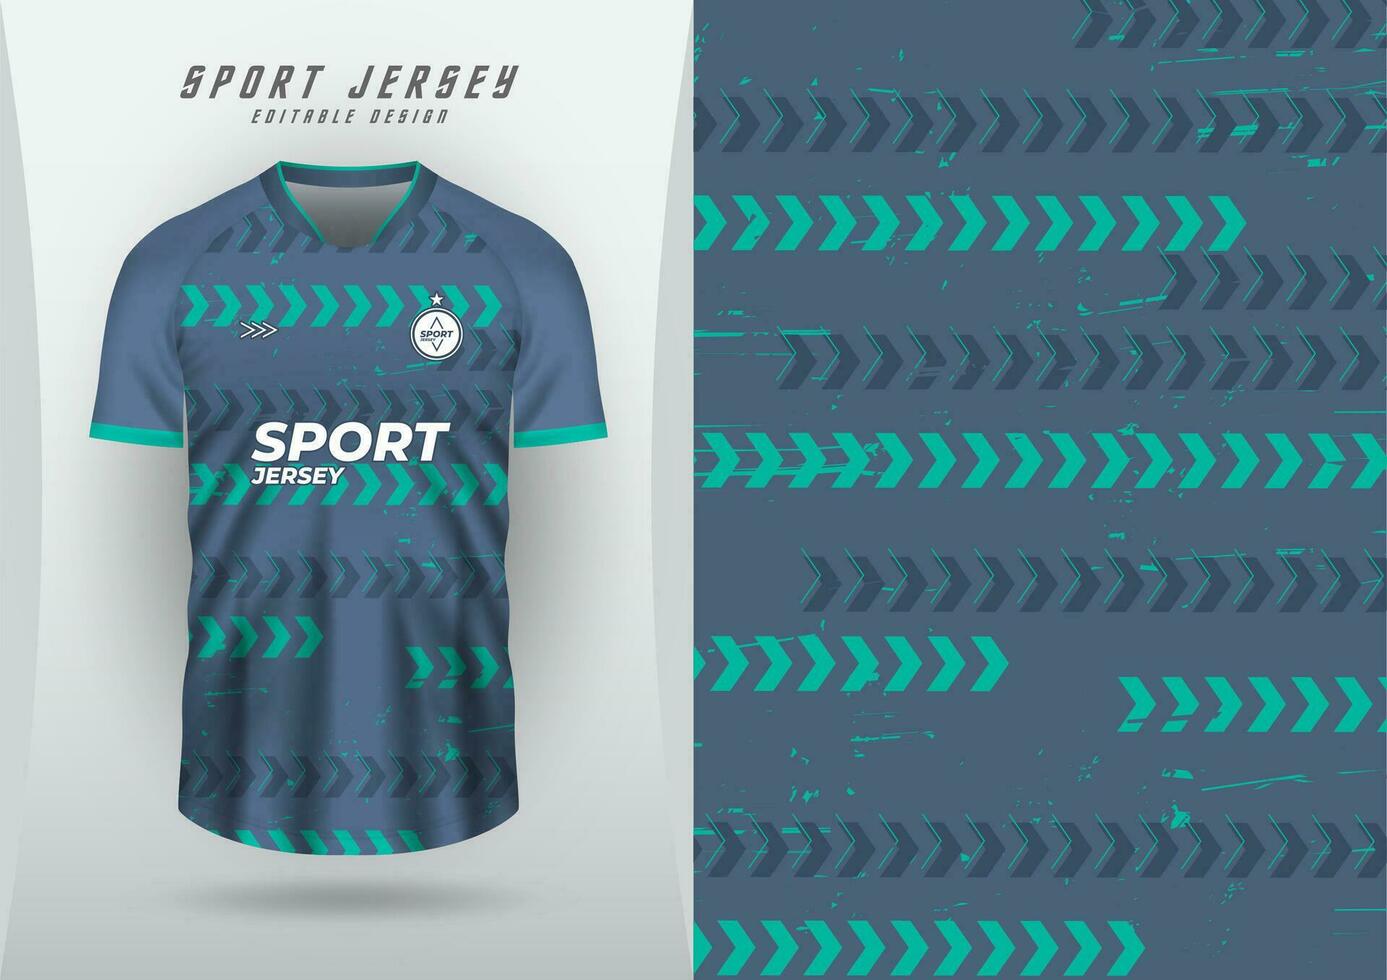 Background for sports jersey, soccer jersey, running jersey, racing jersey, pattern, mint green arrows, dark gray tones. vector